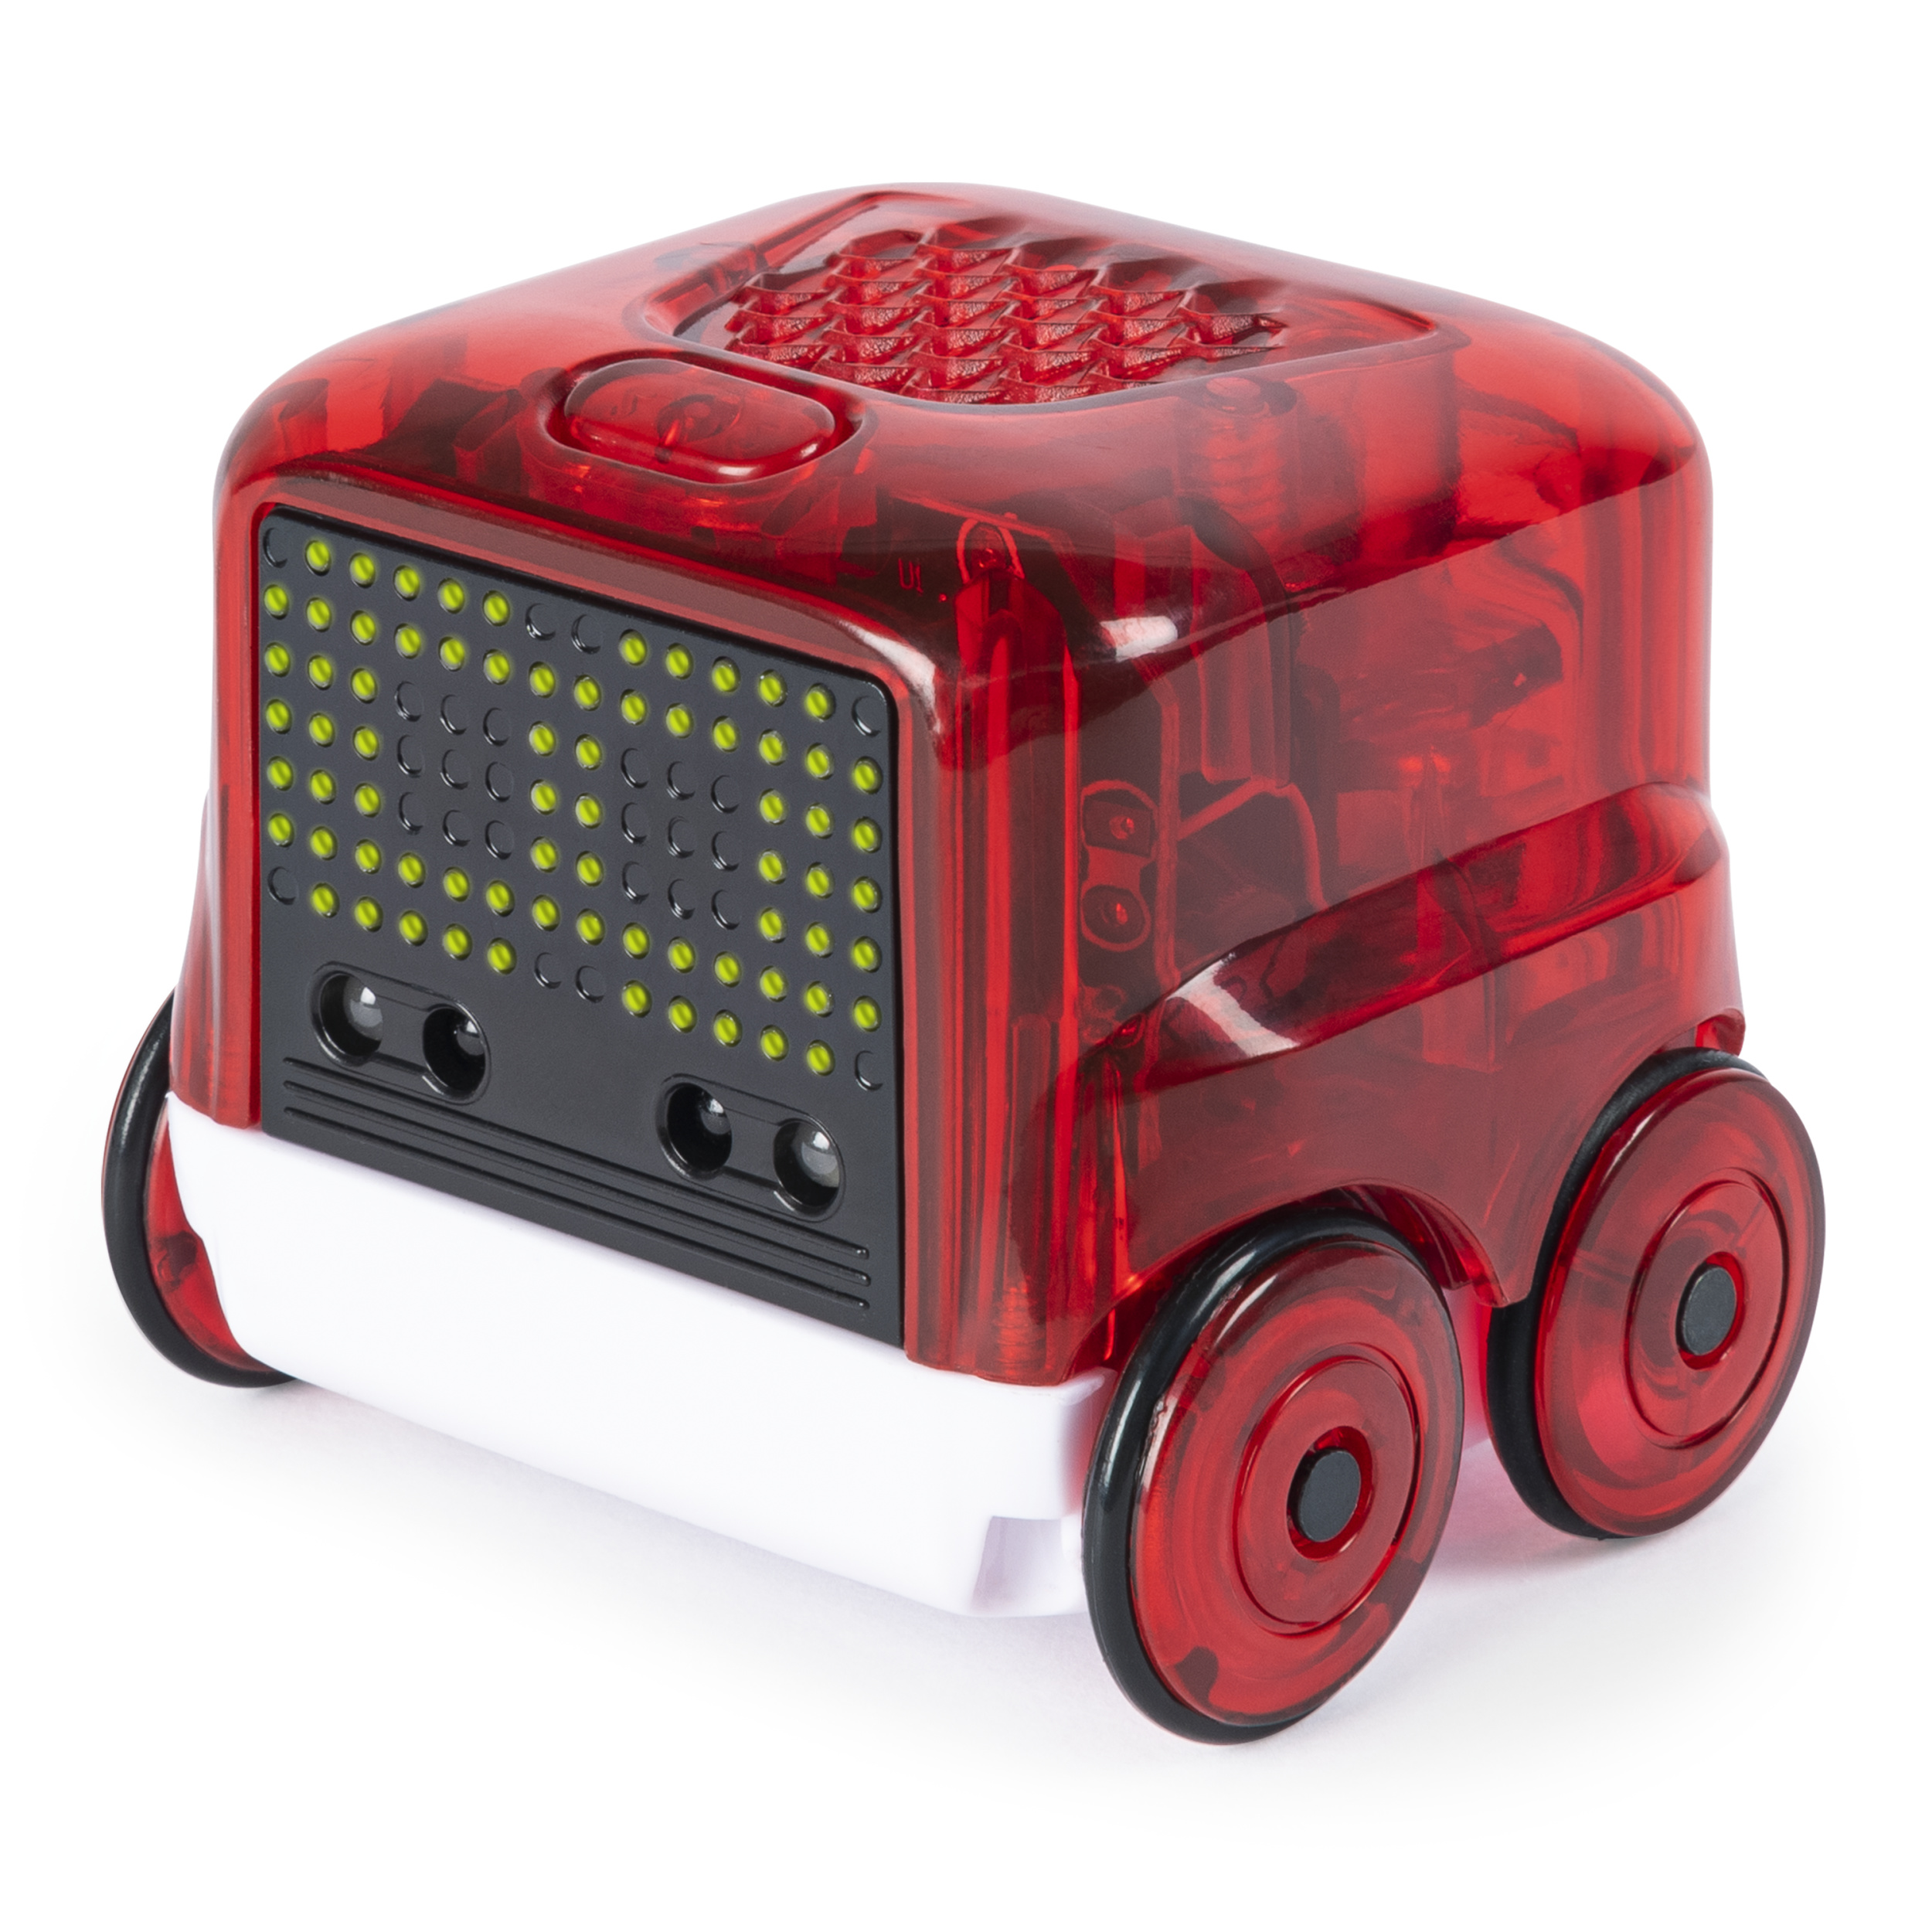 Novie Interactive Smart Robot with Over 75 Actions and Learns 12 Tricks (Red) - image 2 of 7